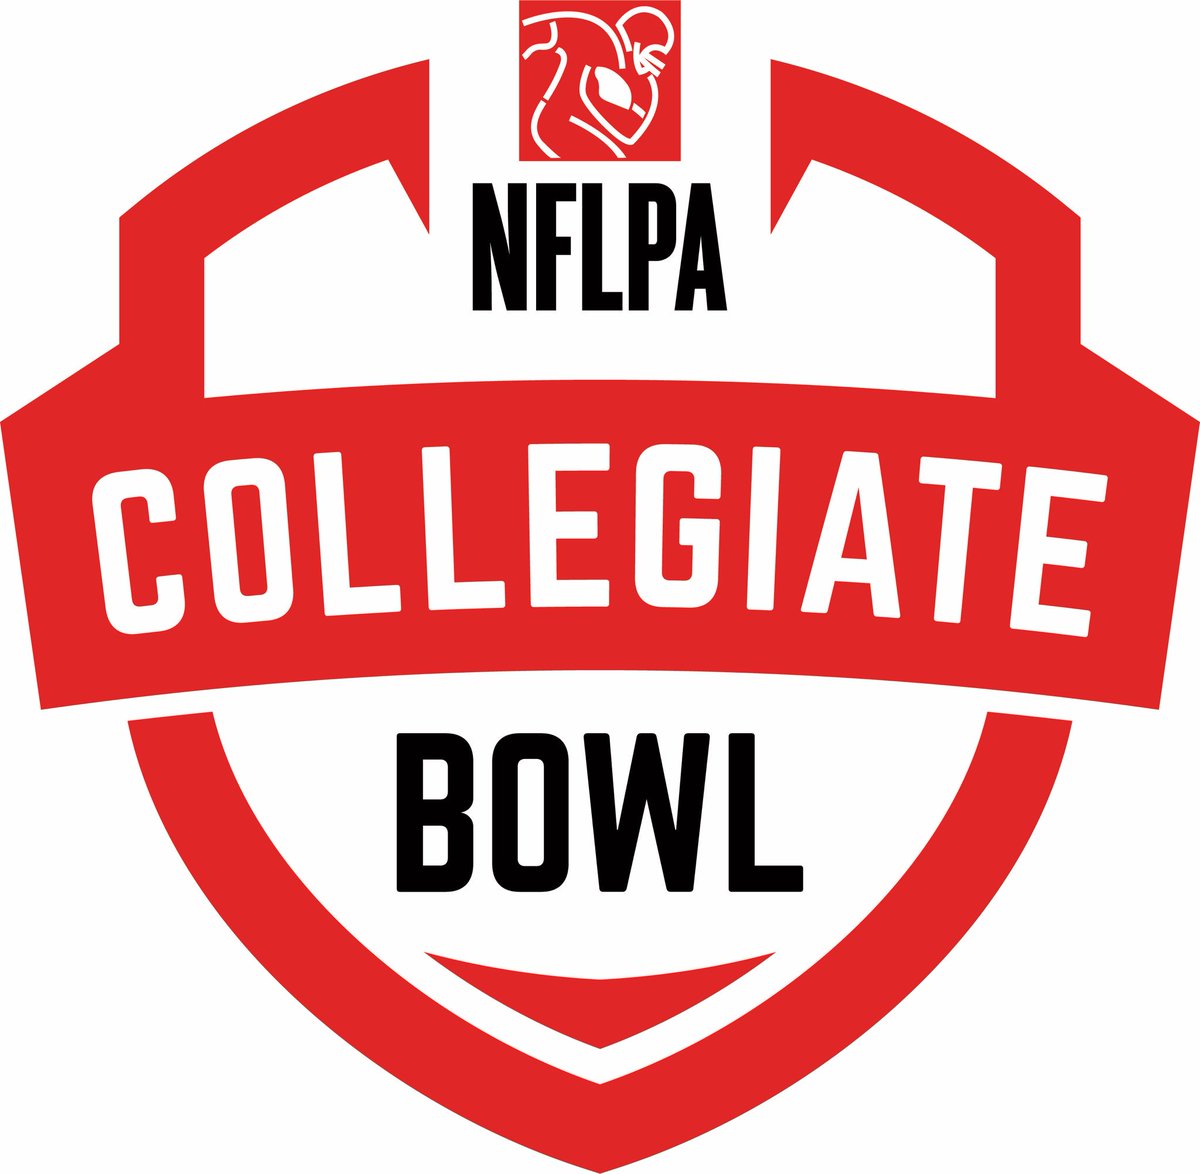 .@NFLPABowl good game between @ArizonaFBall and @TexasTechFB. Fumble recovery by Jorydn Brooks and interception by Douglas Coleman in 1st quarter. Jace Whittaker is also having a good game.